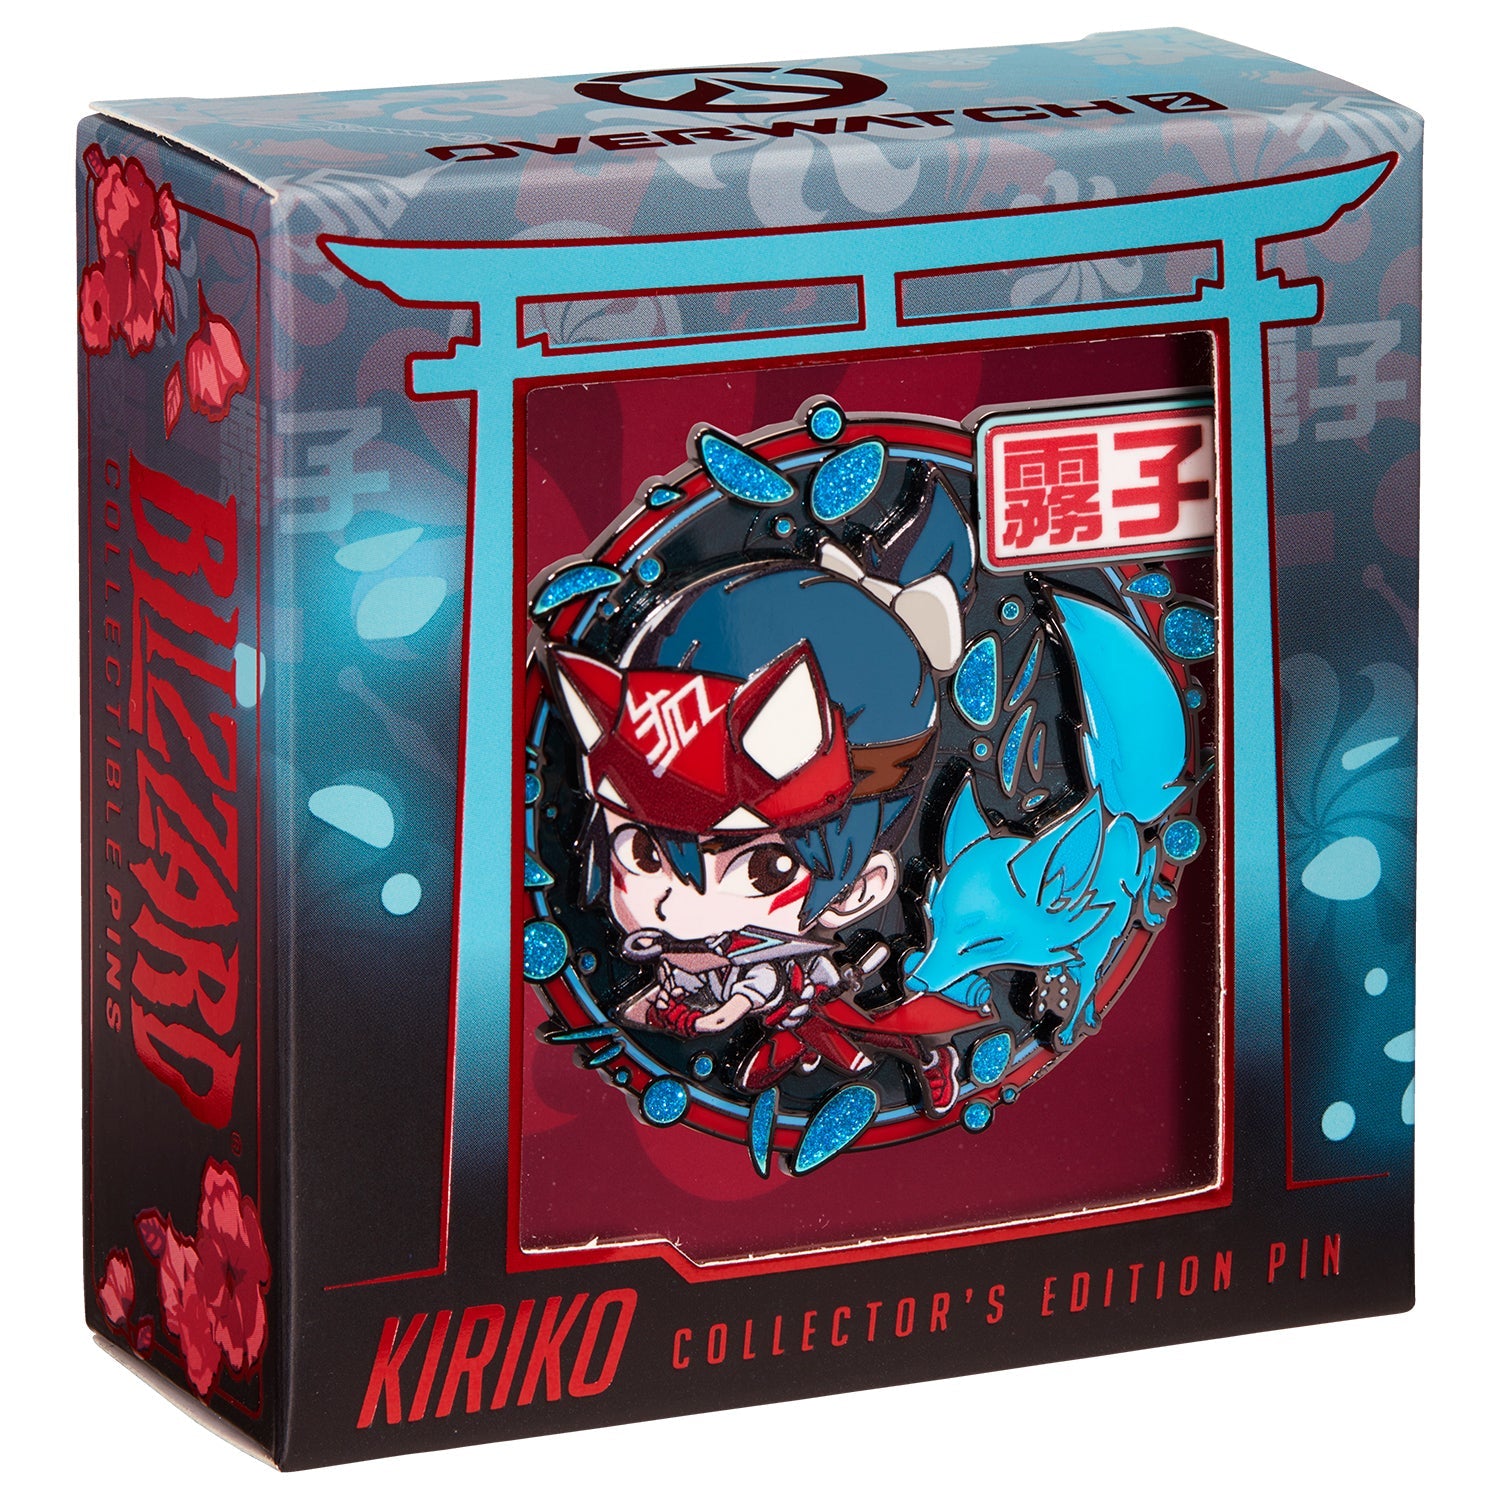 Overwatch 2 Kiriko Collector's Edition Pin - Front View in Box